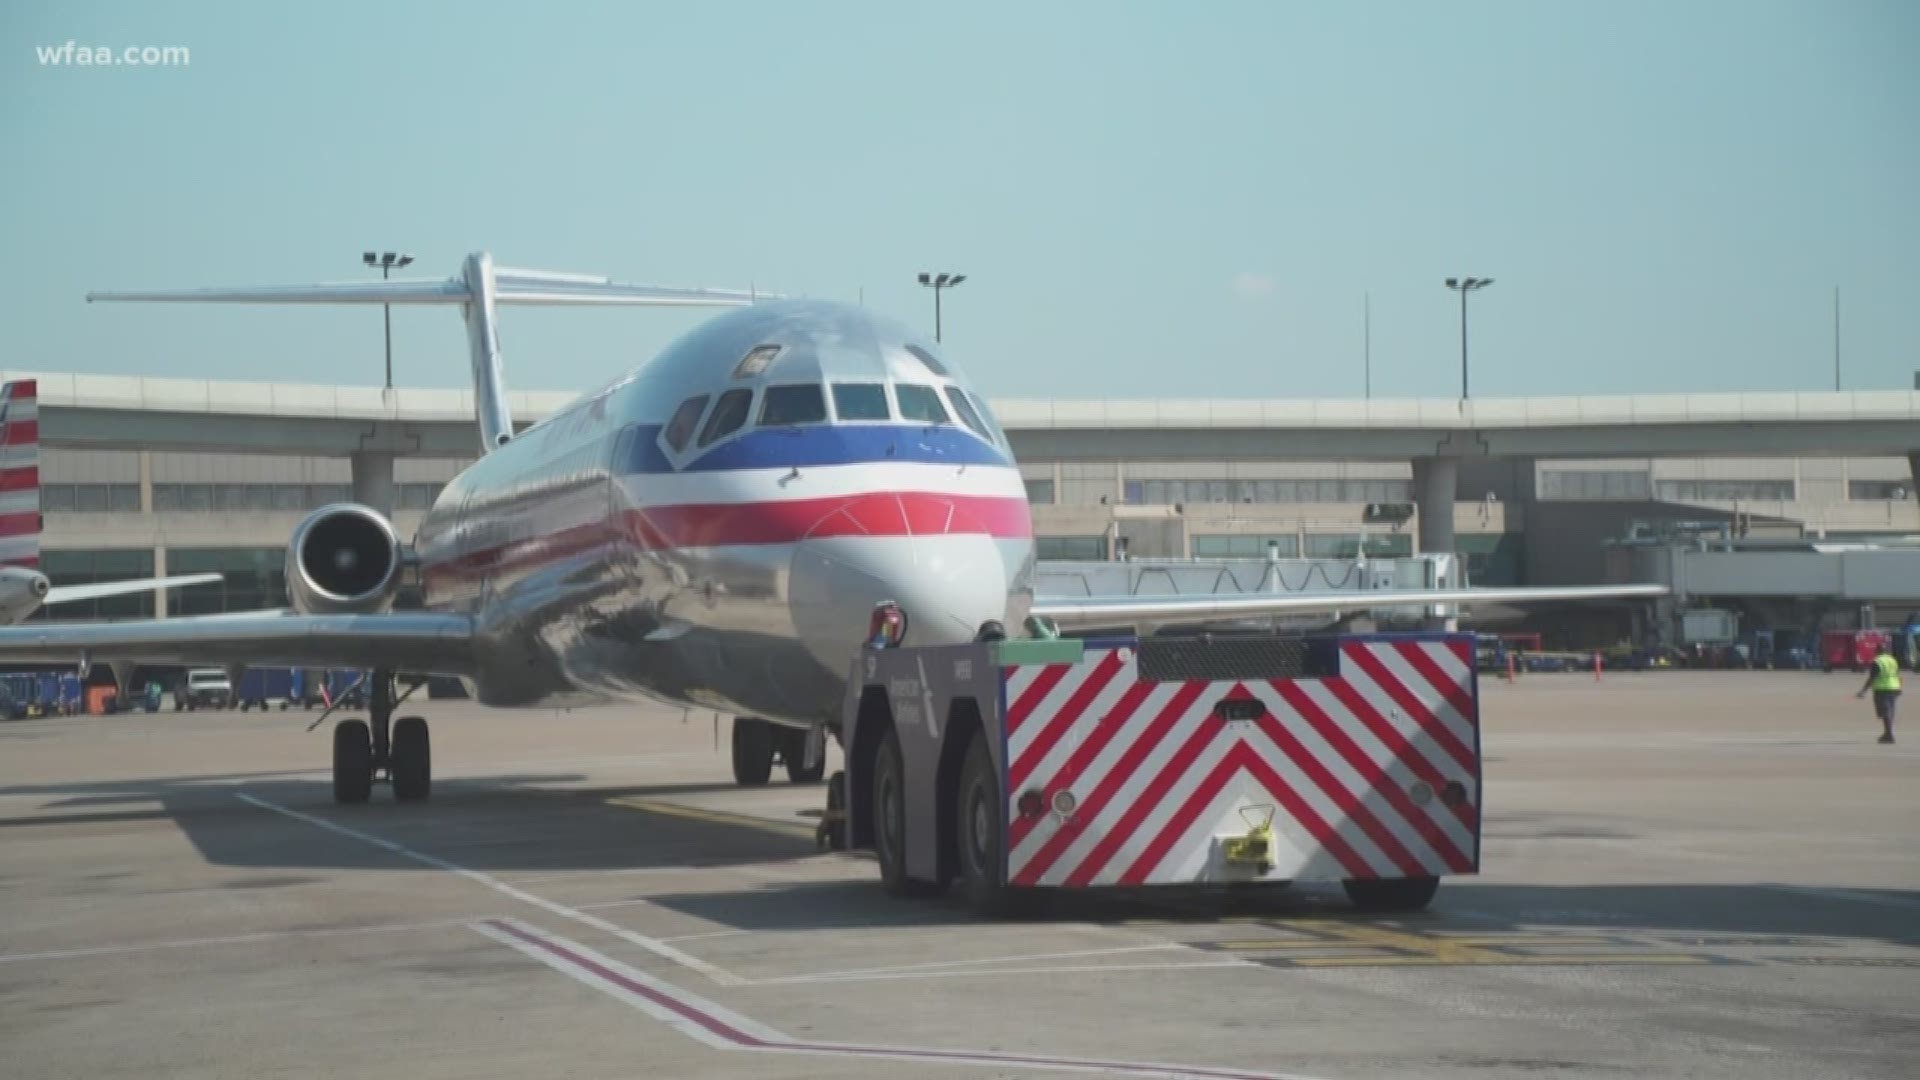 Wednesday marked the end of an era for American Airlines. The MD-80 retired to Roswell after a 36-year journey with the airline. “This airplane is a classic. It’s like a ’57 Chevy,” said Capt. Scott Shankland. “It was truly the workhorse of American during the expansion in the mid-90s."